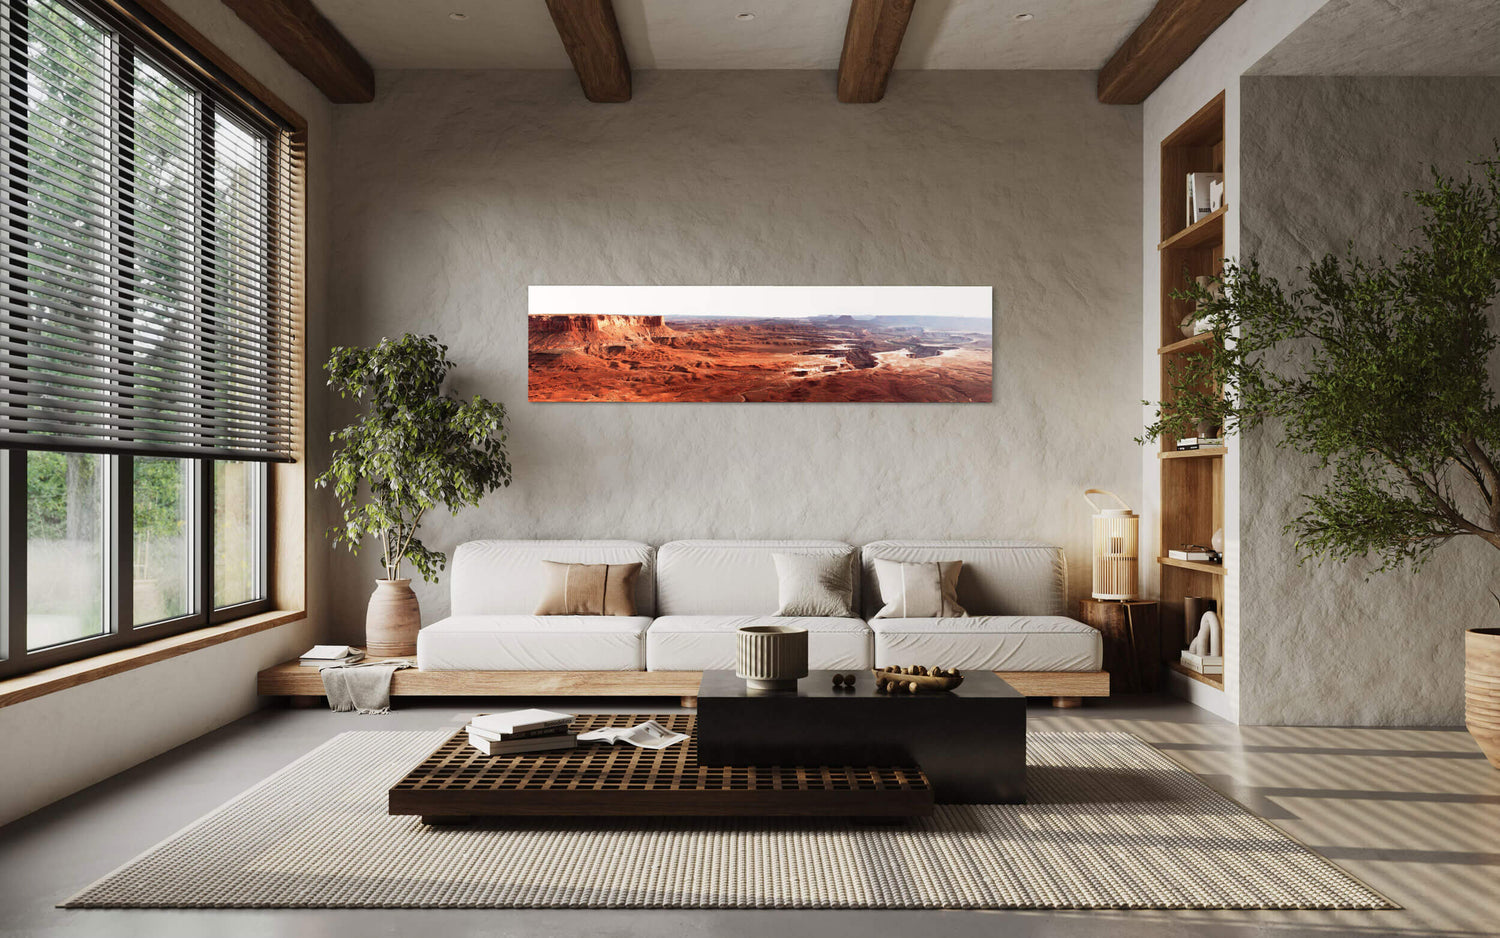 A Canyonlands National Park picture showing the Green River Overlook hangs in a living room.